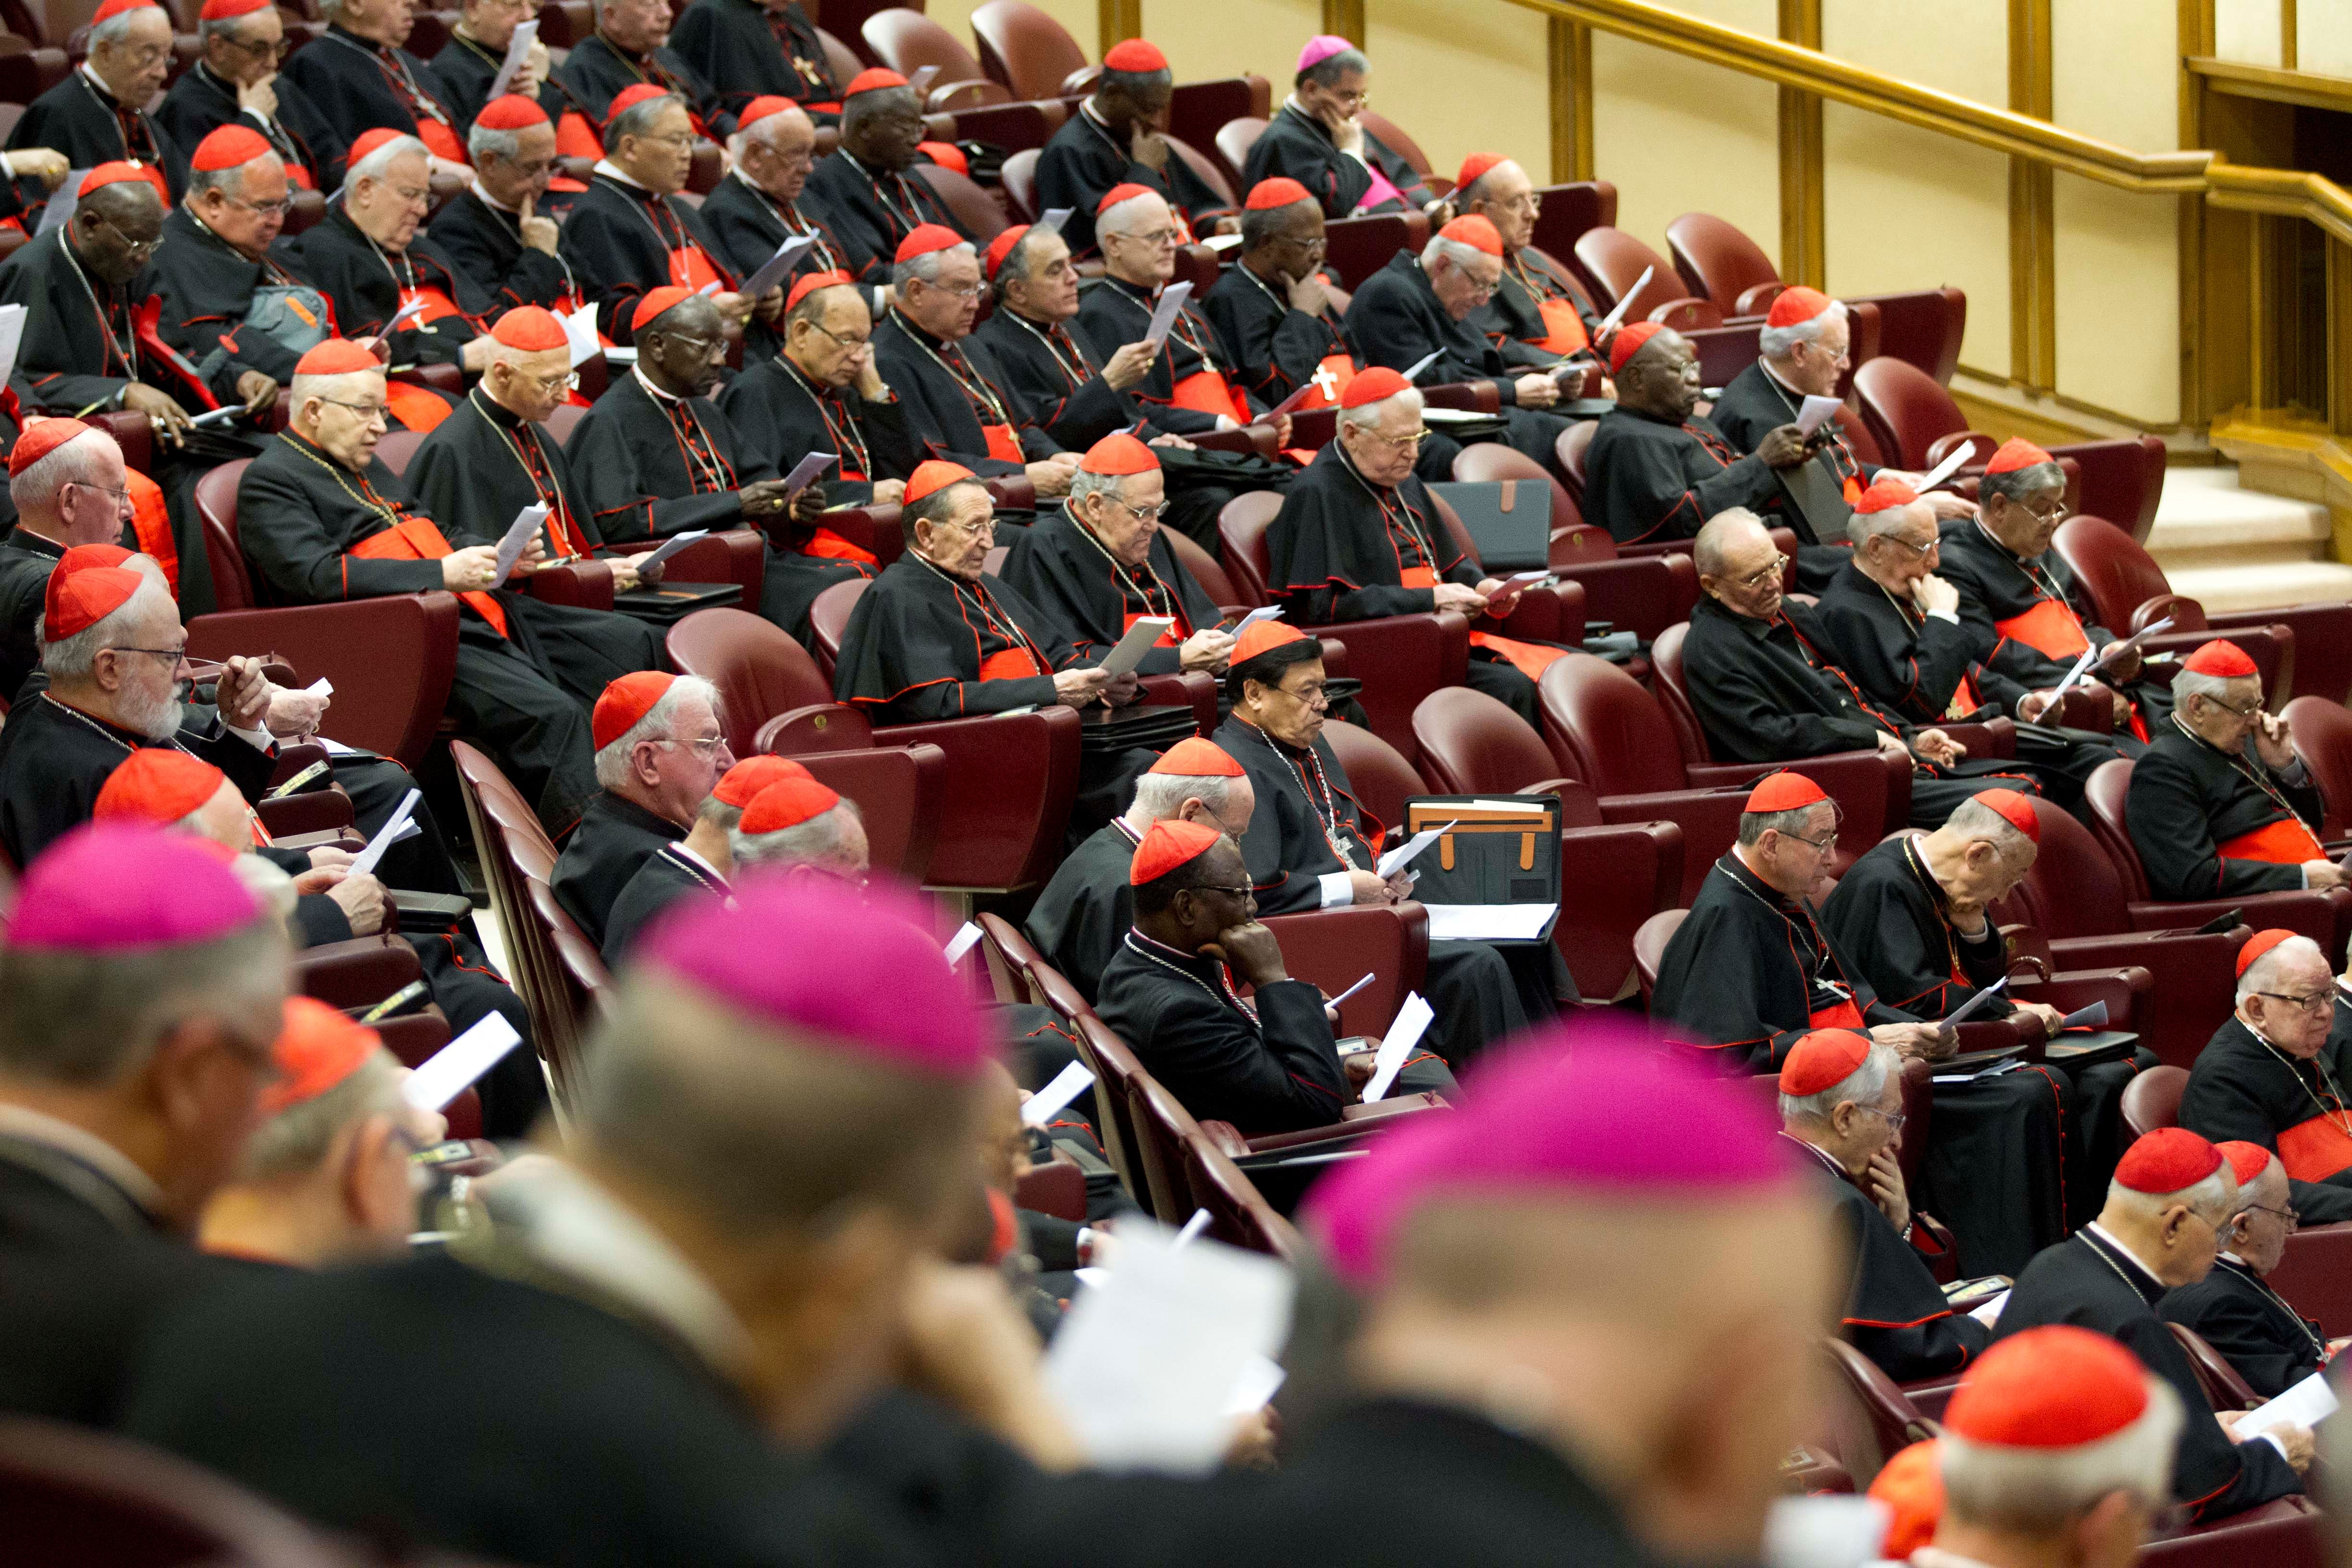 Vatican protests Italy's anti-homophobia law in rare public intervention: 'An unprecedented act'